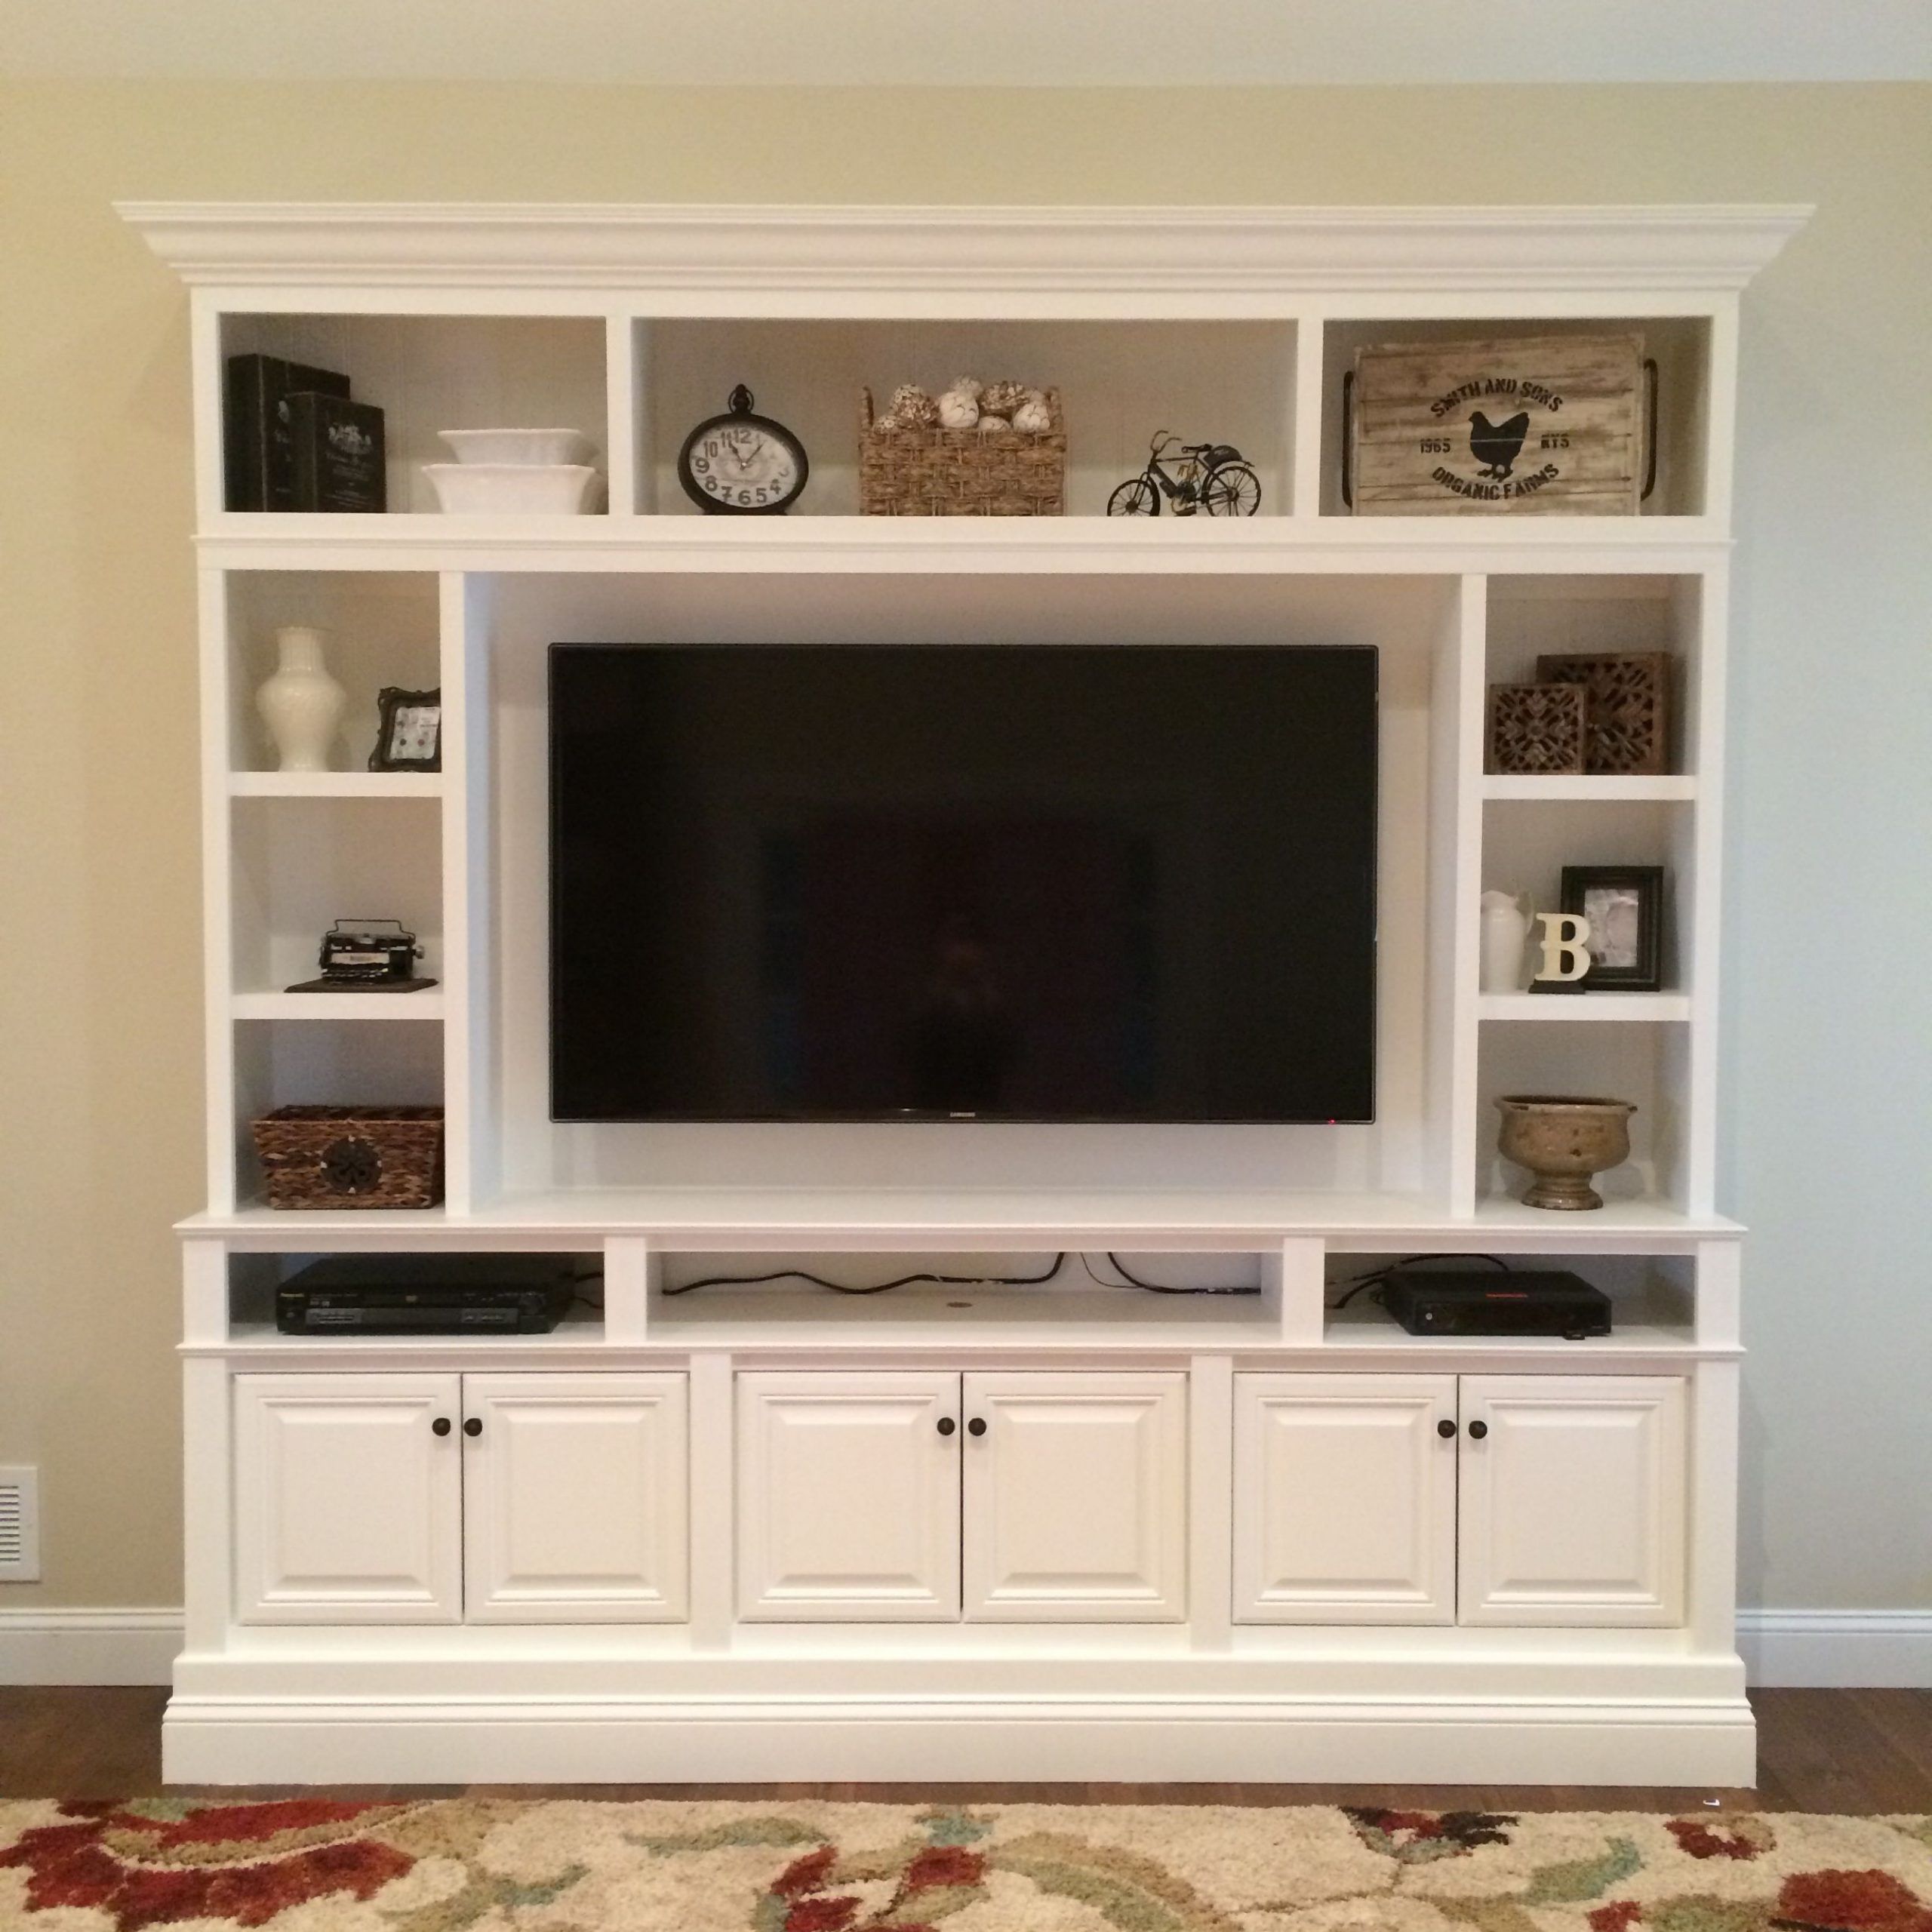 28+ Amazing Diy Tv Stand Ideas That You Can Build Right Regarding Diy Convertible Tv Stands And Bookcase (View 2 of 15)